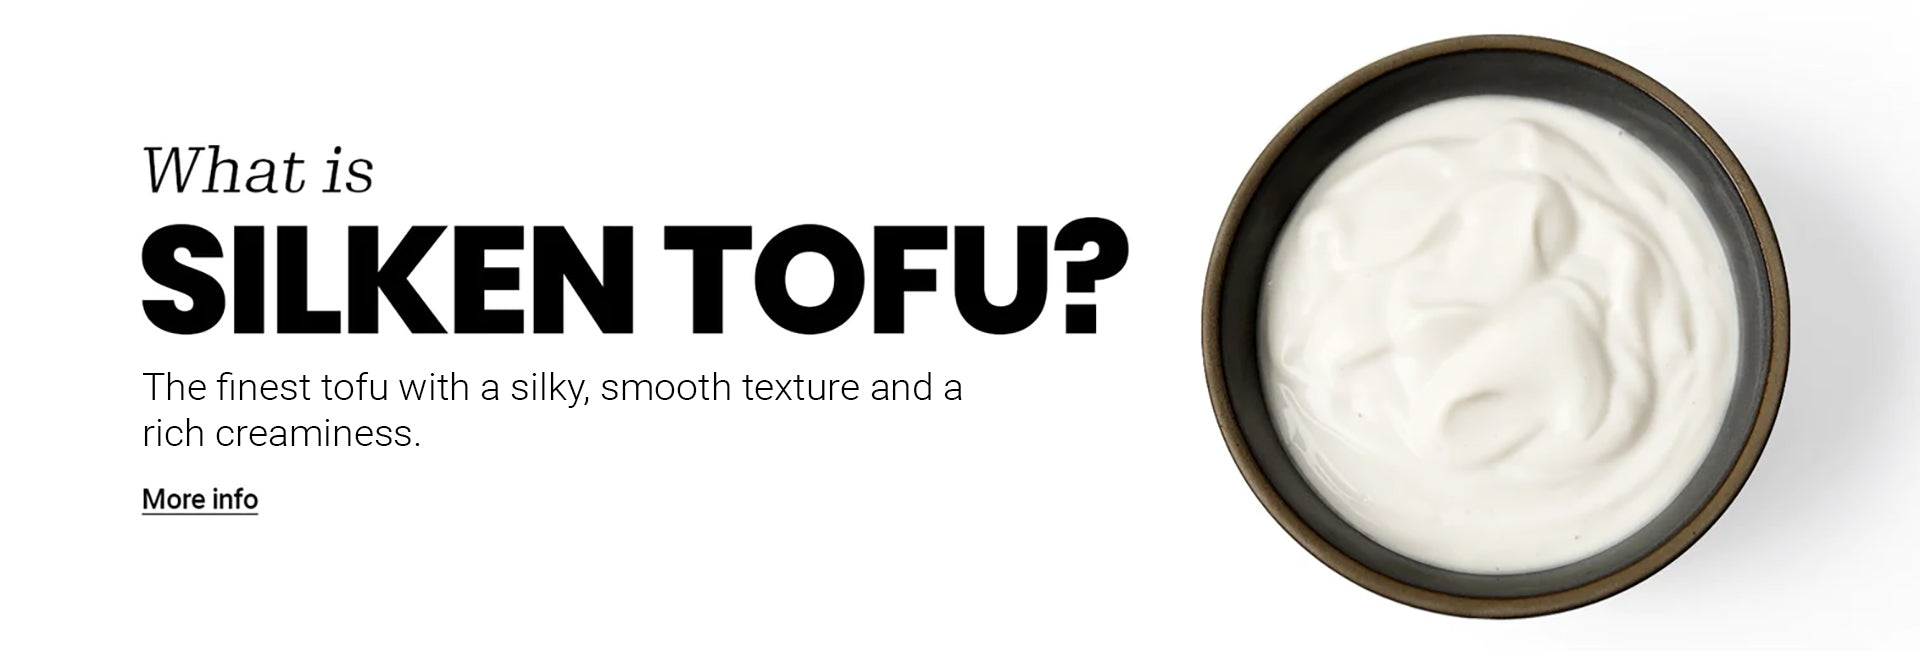 What is Silken Tofu? The finest tofu with a silky smooth texture and a rich creaminess.